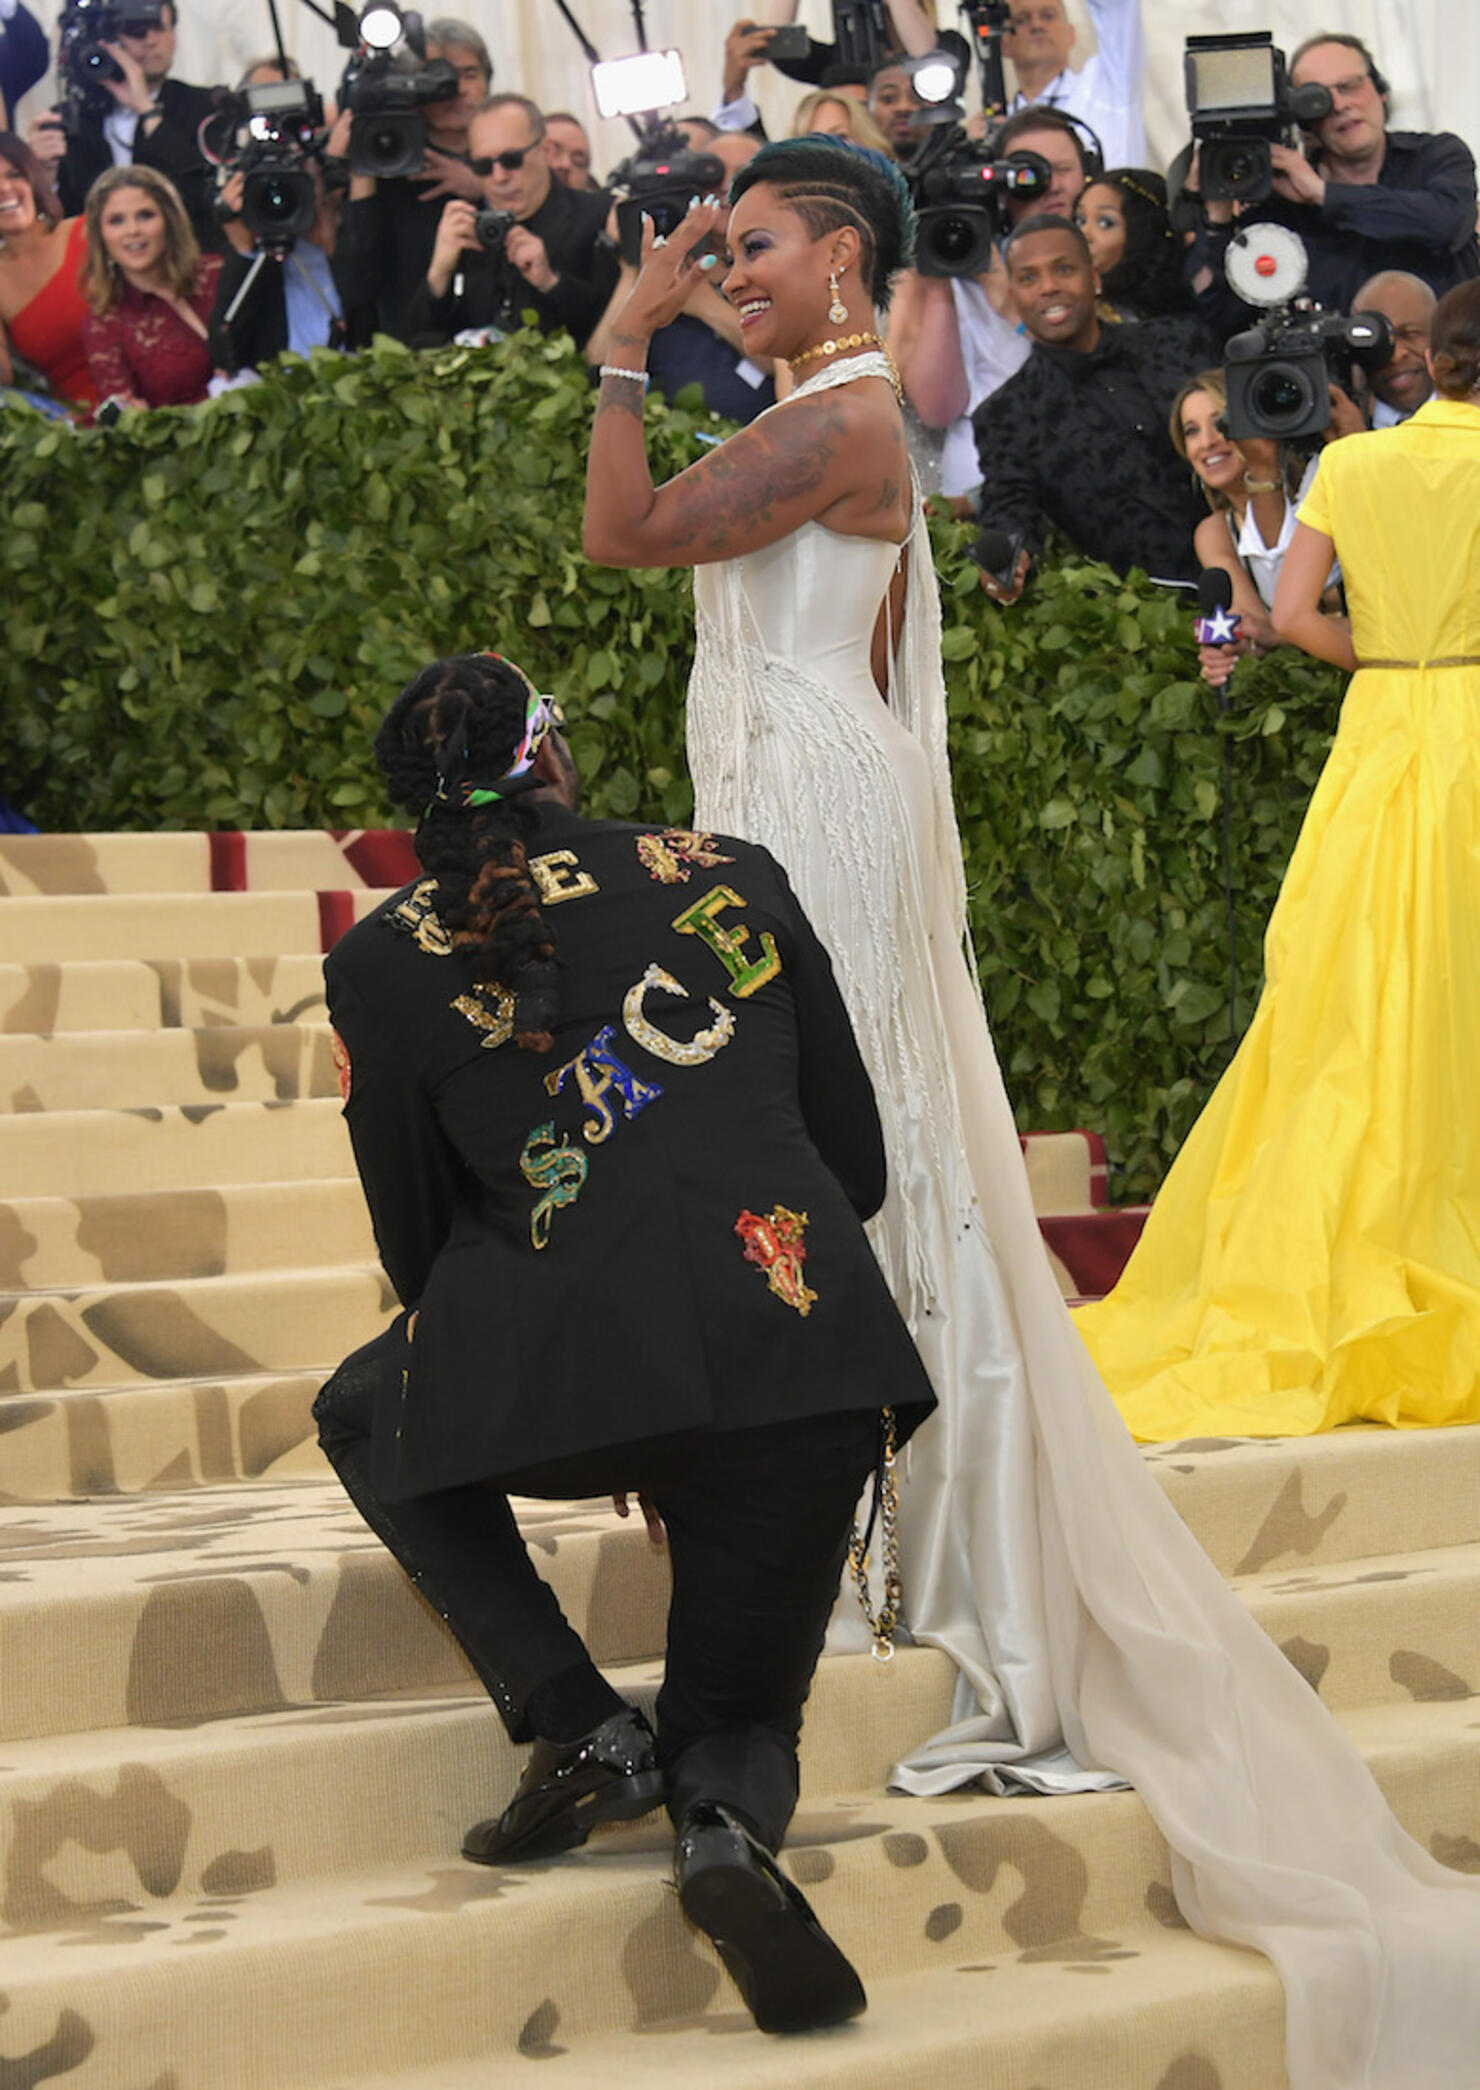 2 Chainz gets engaged to longtime girlfriend Kesha Ward at the Met Gala